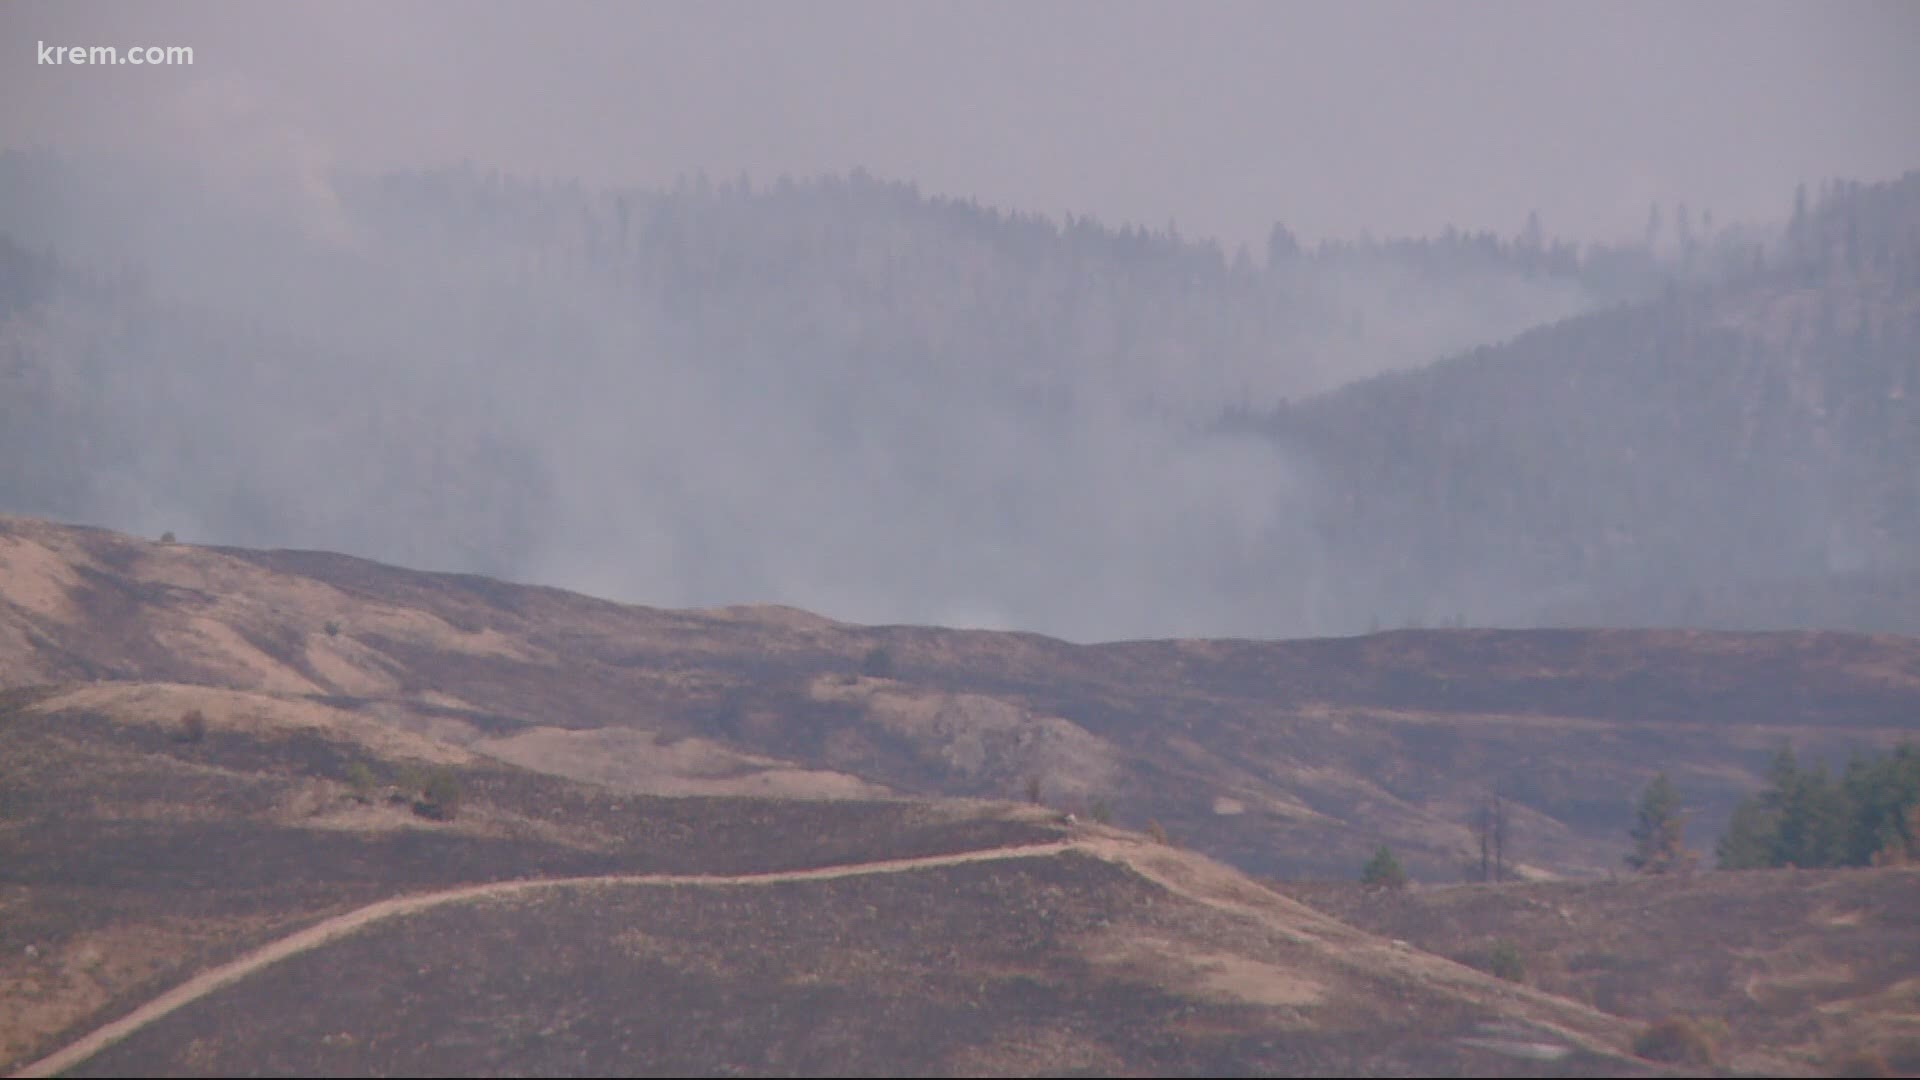 Inslee said the first thing he was able to do to help the community was provide aerial support to fight the fire.